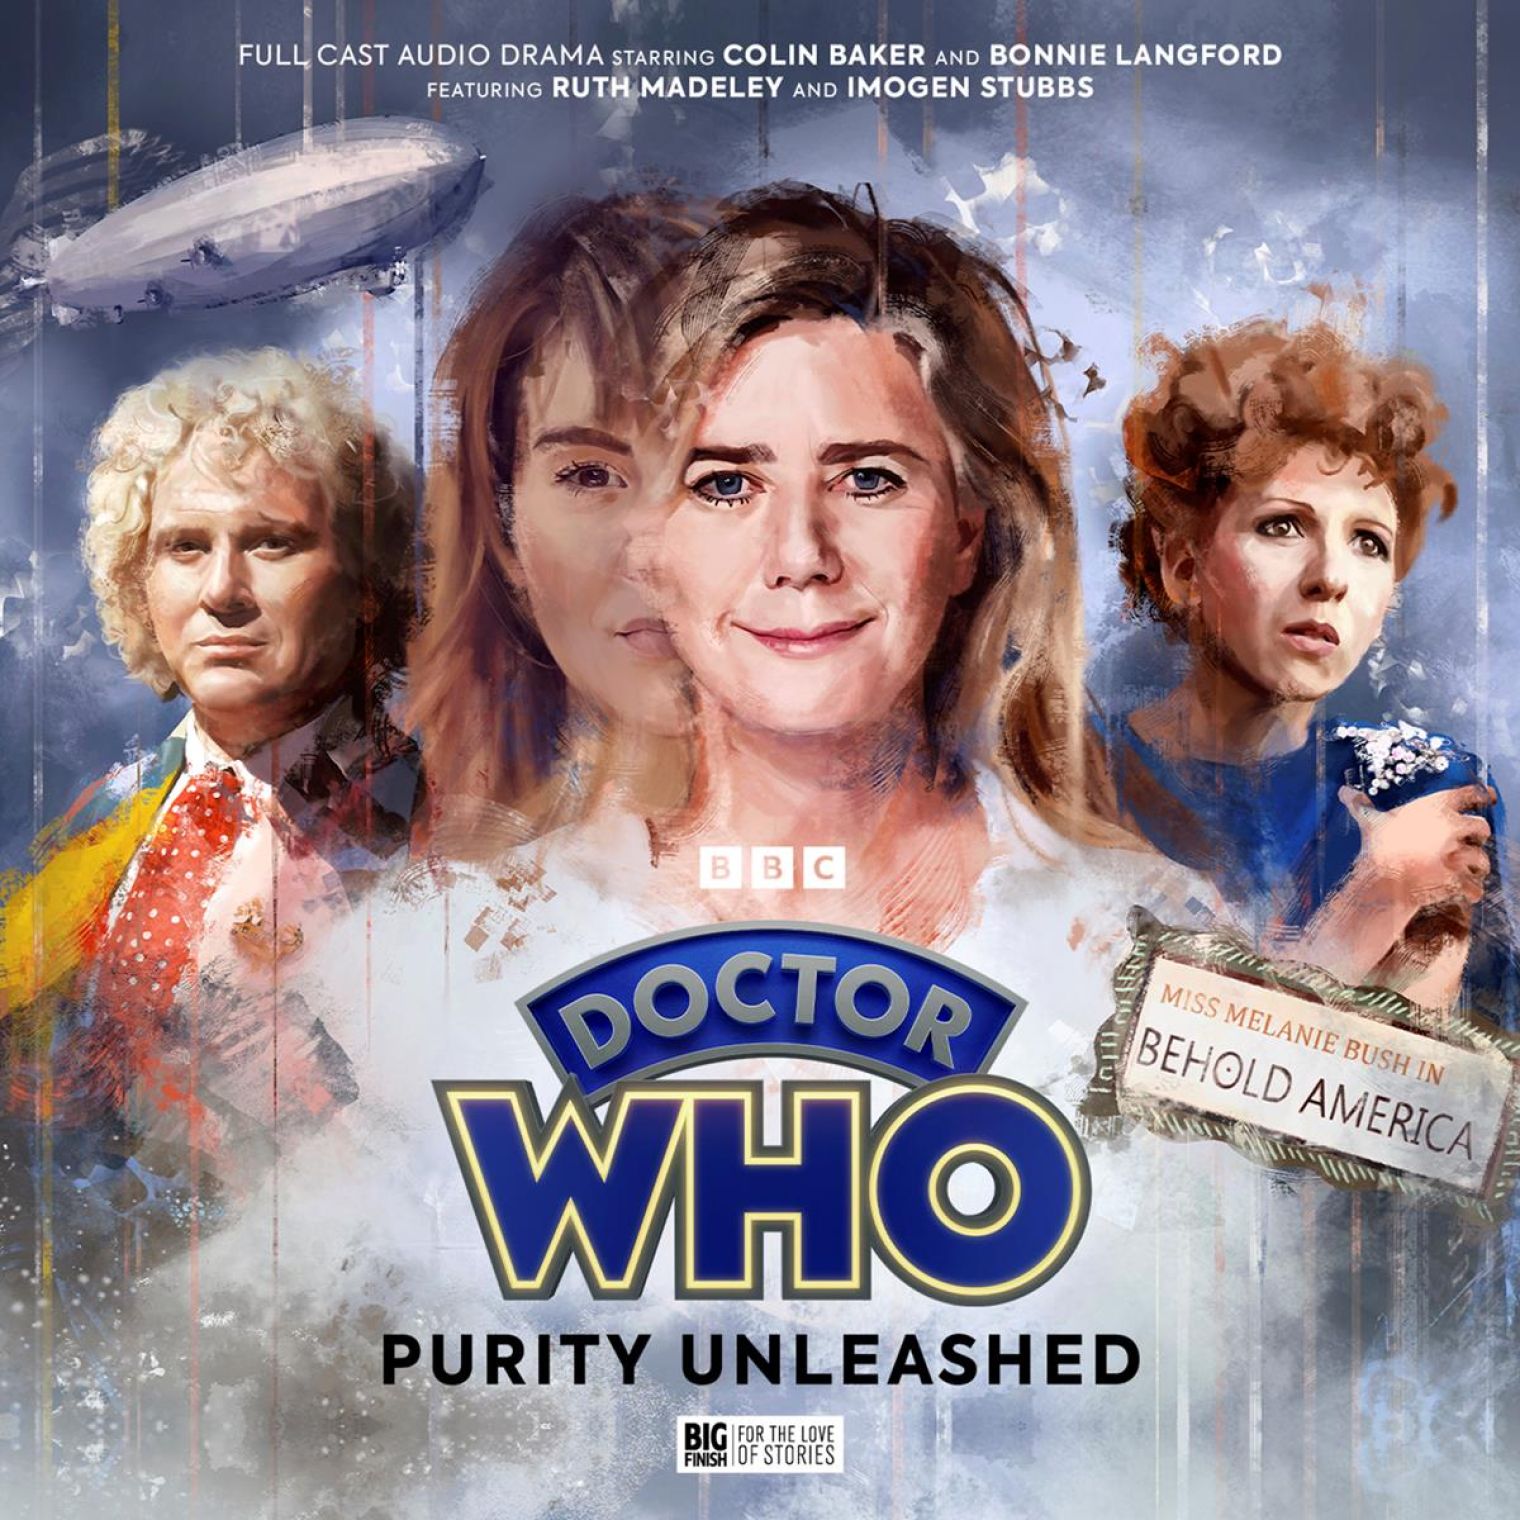 Imogen Stubbs stars as Patricia McBride in new audio drama ‘Doctor Who: Purity Unleashed' which is out today